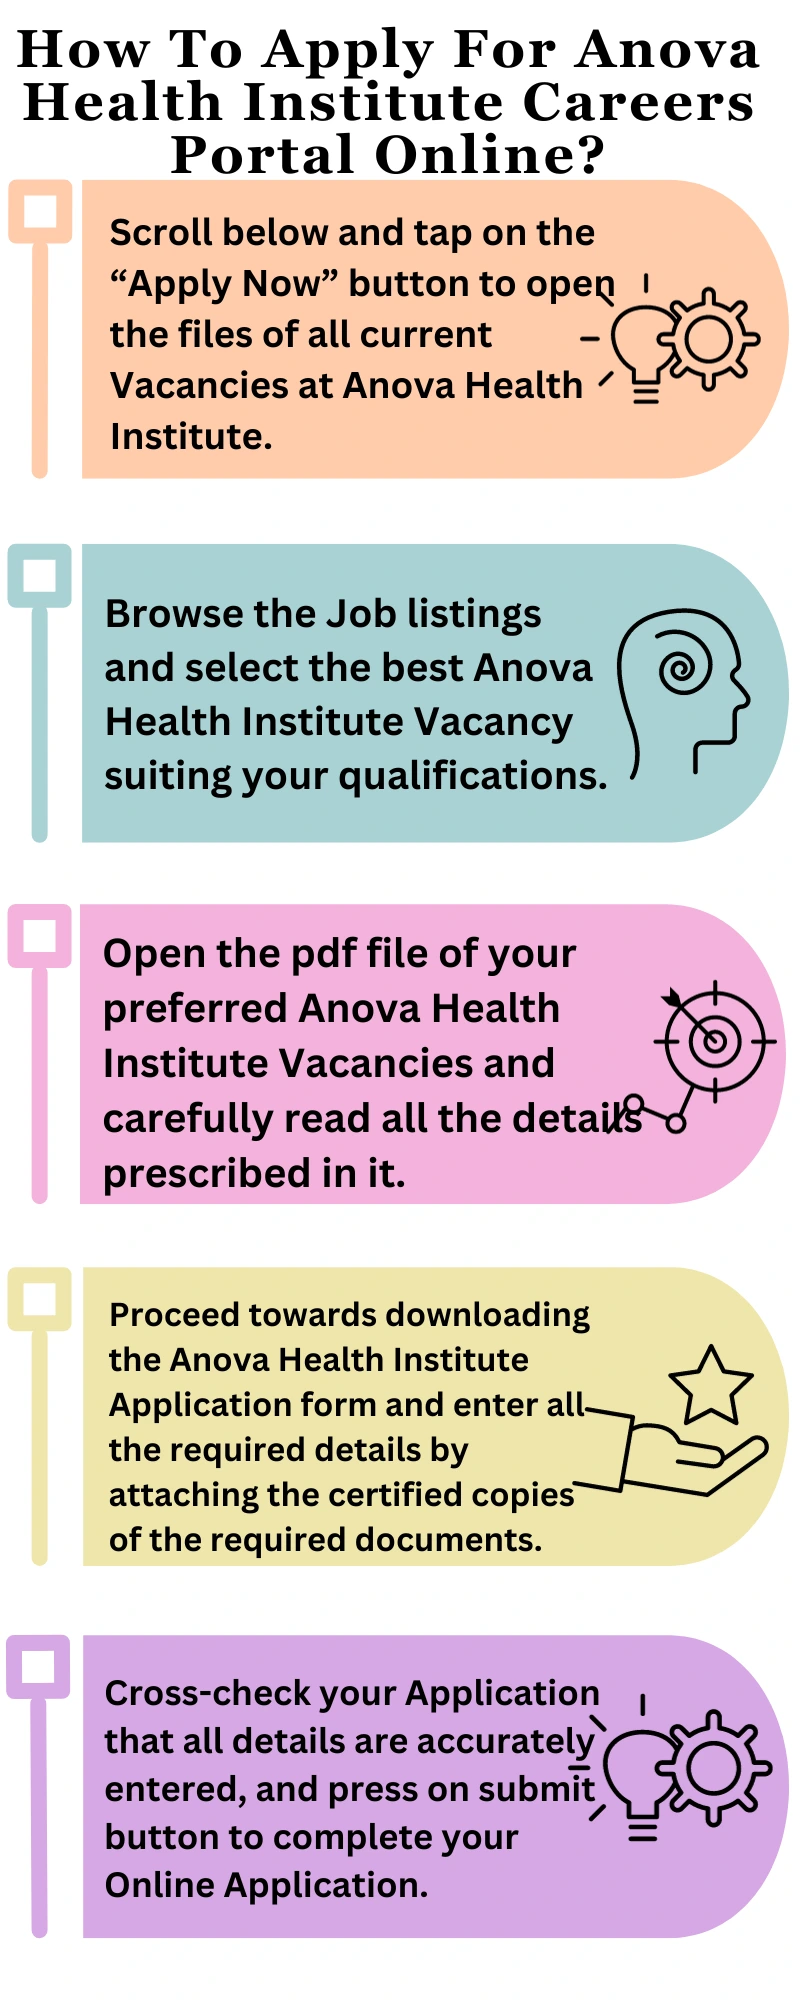 How To Apply For Anova Health Institute Careers Portal Online?